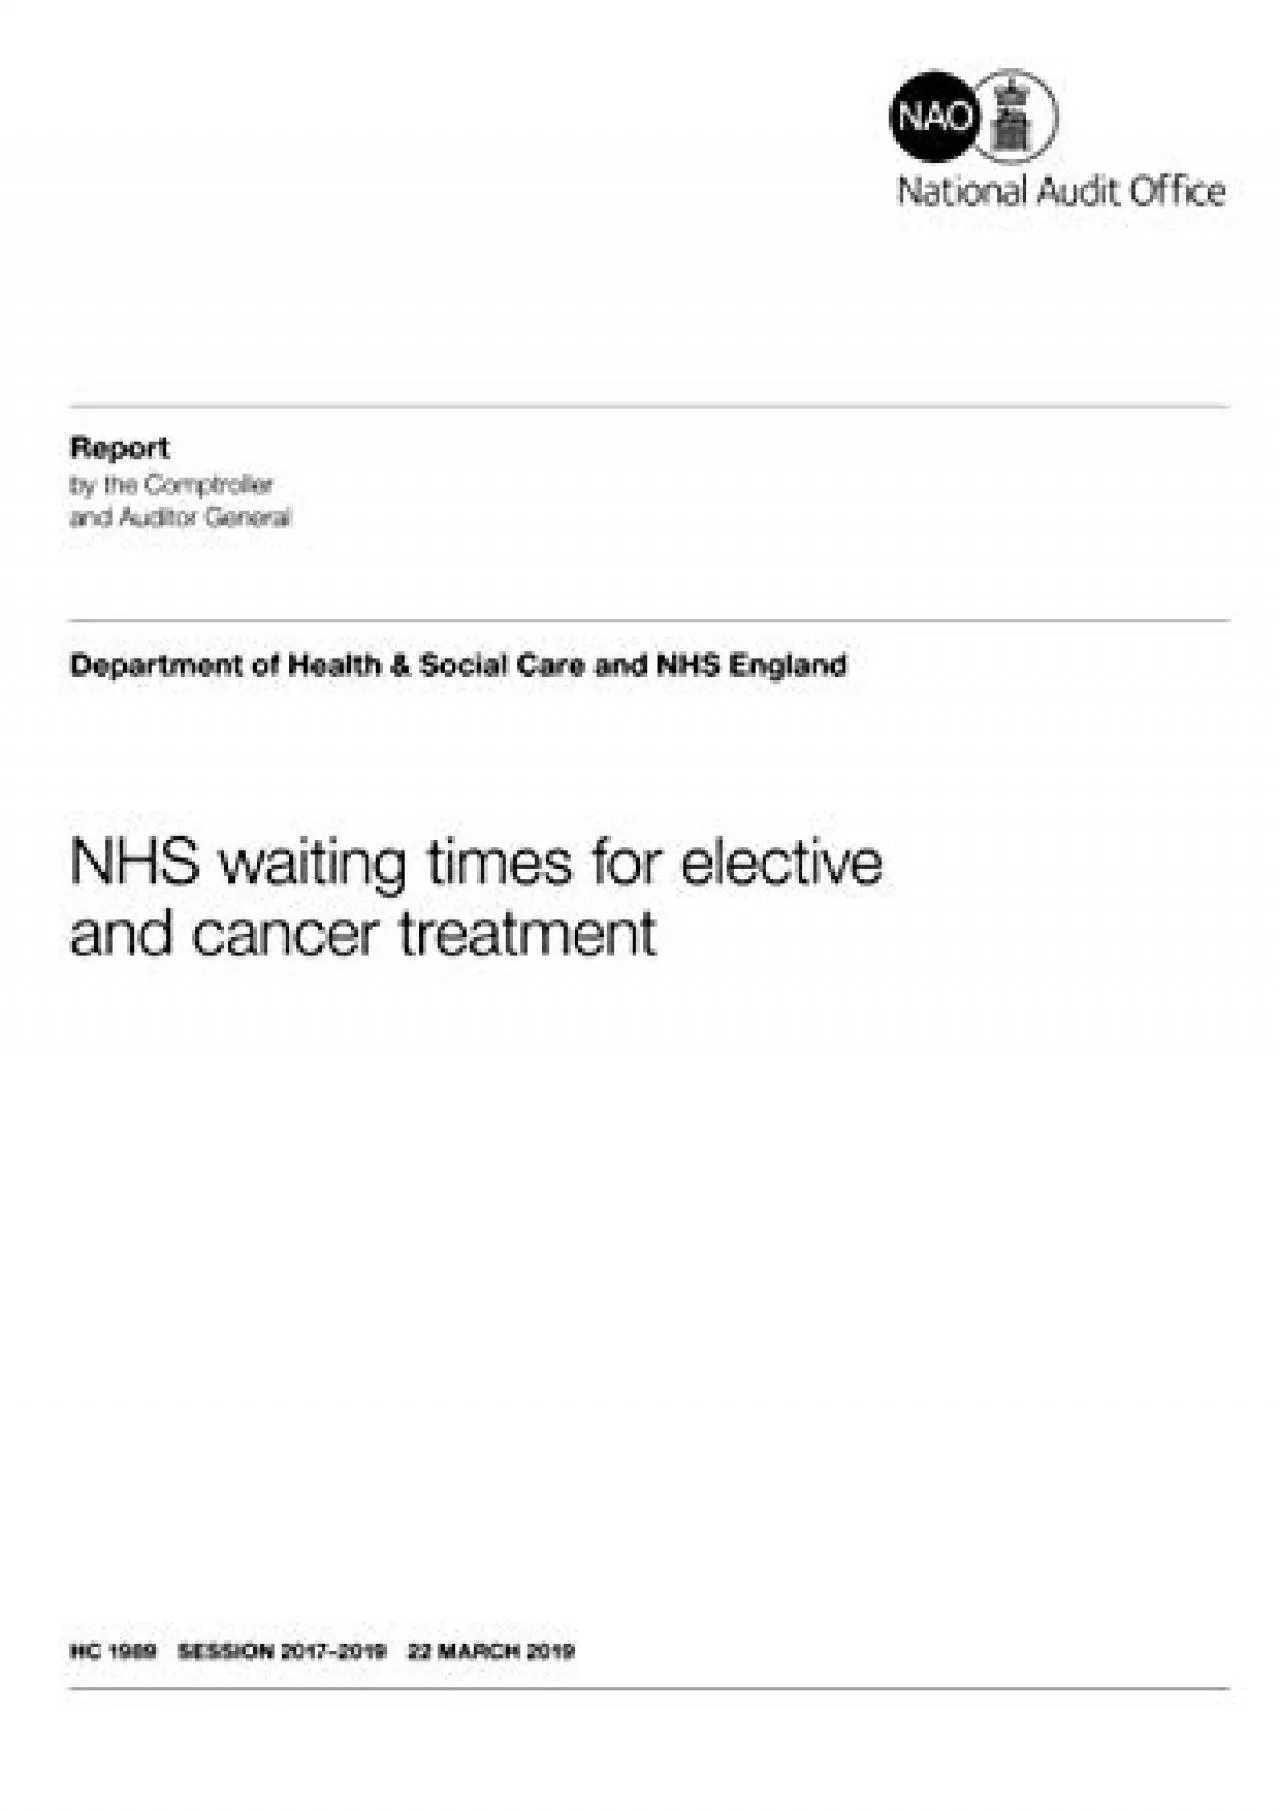 NHS waiting times for elective and cancer treatment (House of Commons 2017-19)